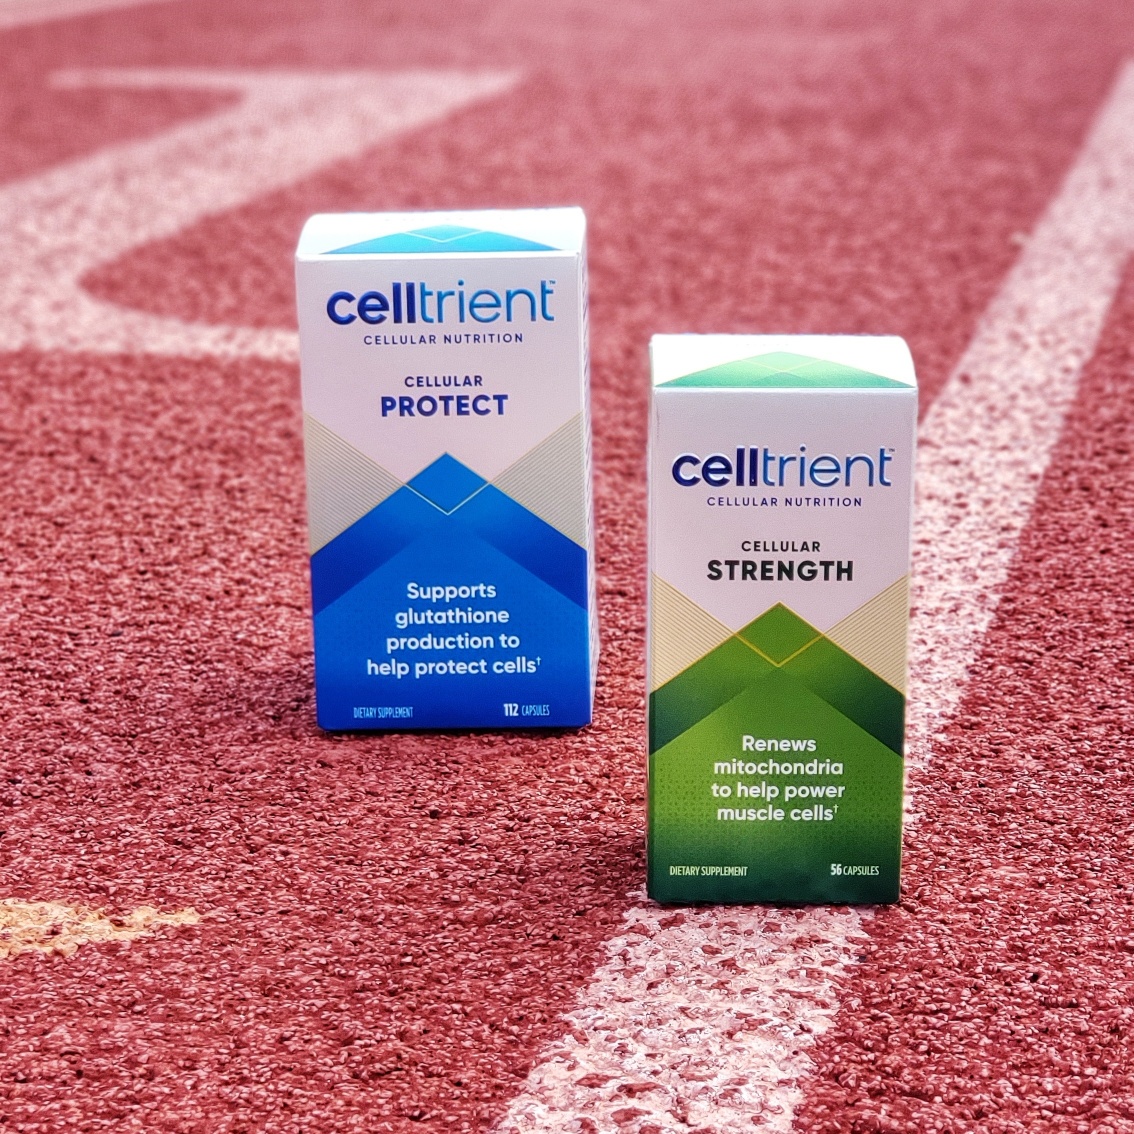 Celltrient - Strength and Protect formulas to help support cells a and promote healthy aging.